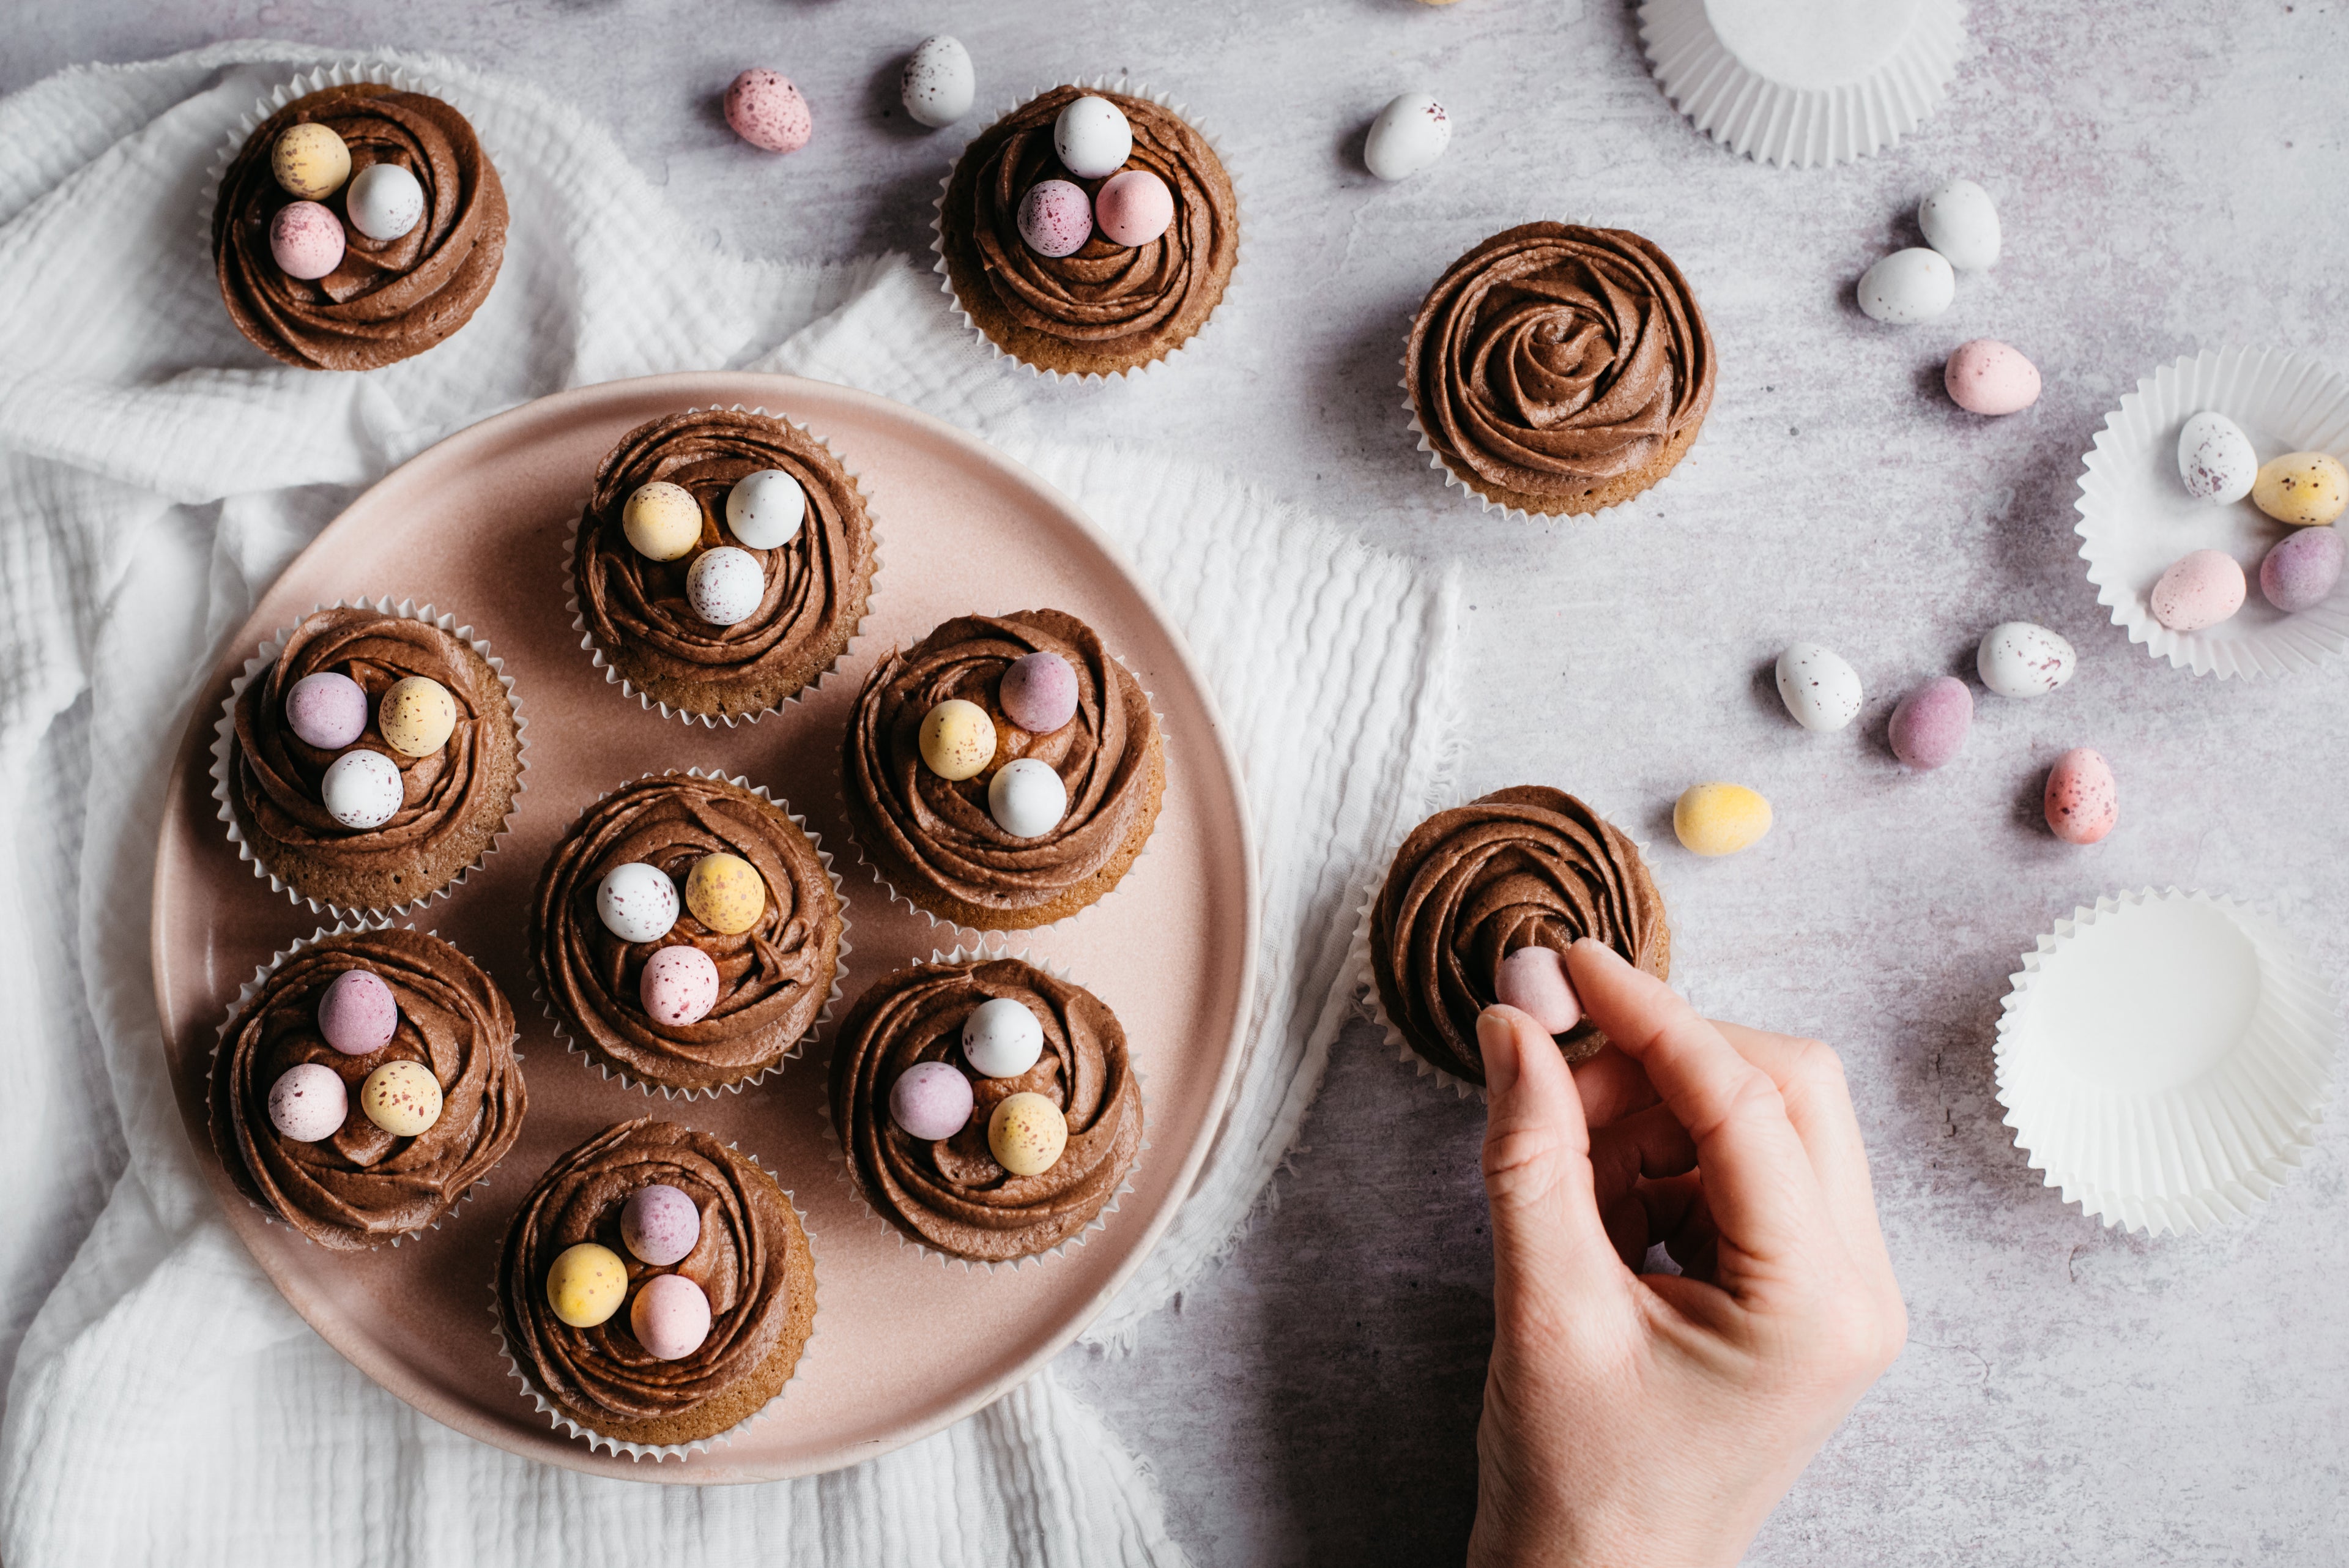 Chocolate cupcakes topped with rich chocolate icing and Cadbury's Mini Eggs